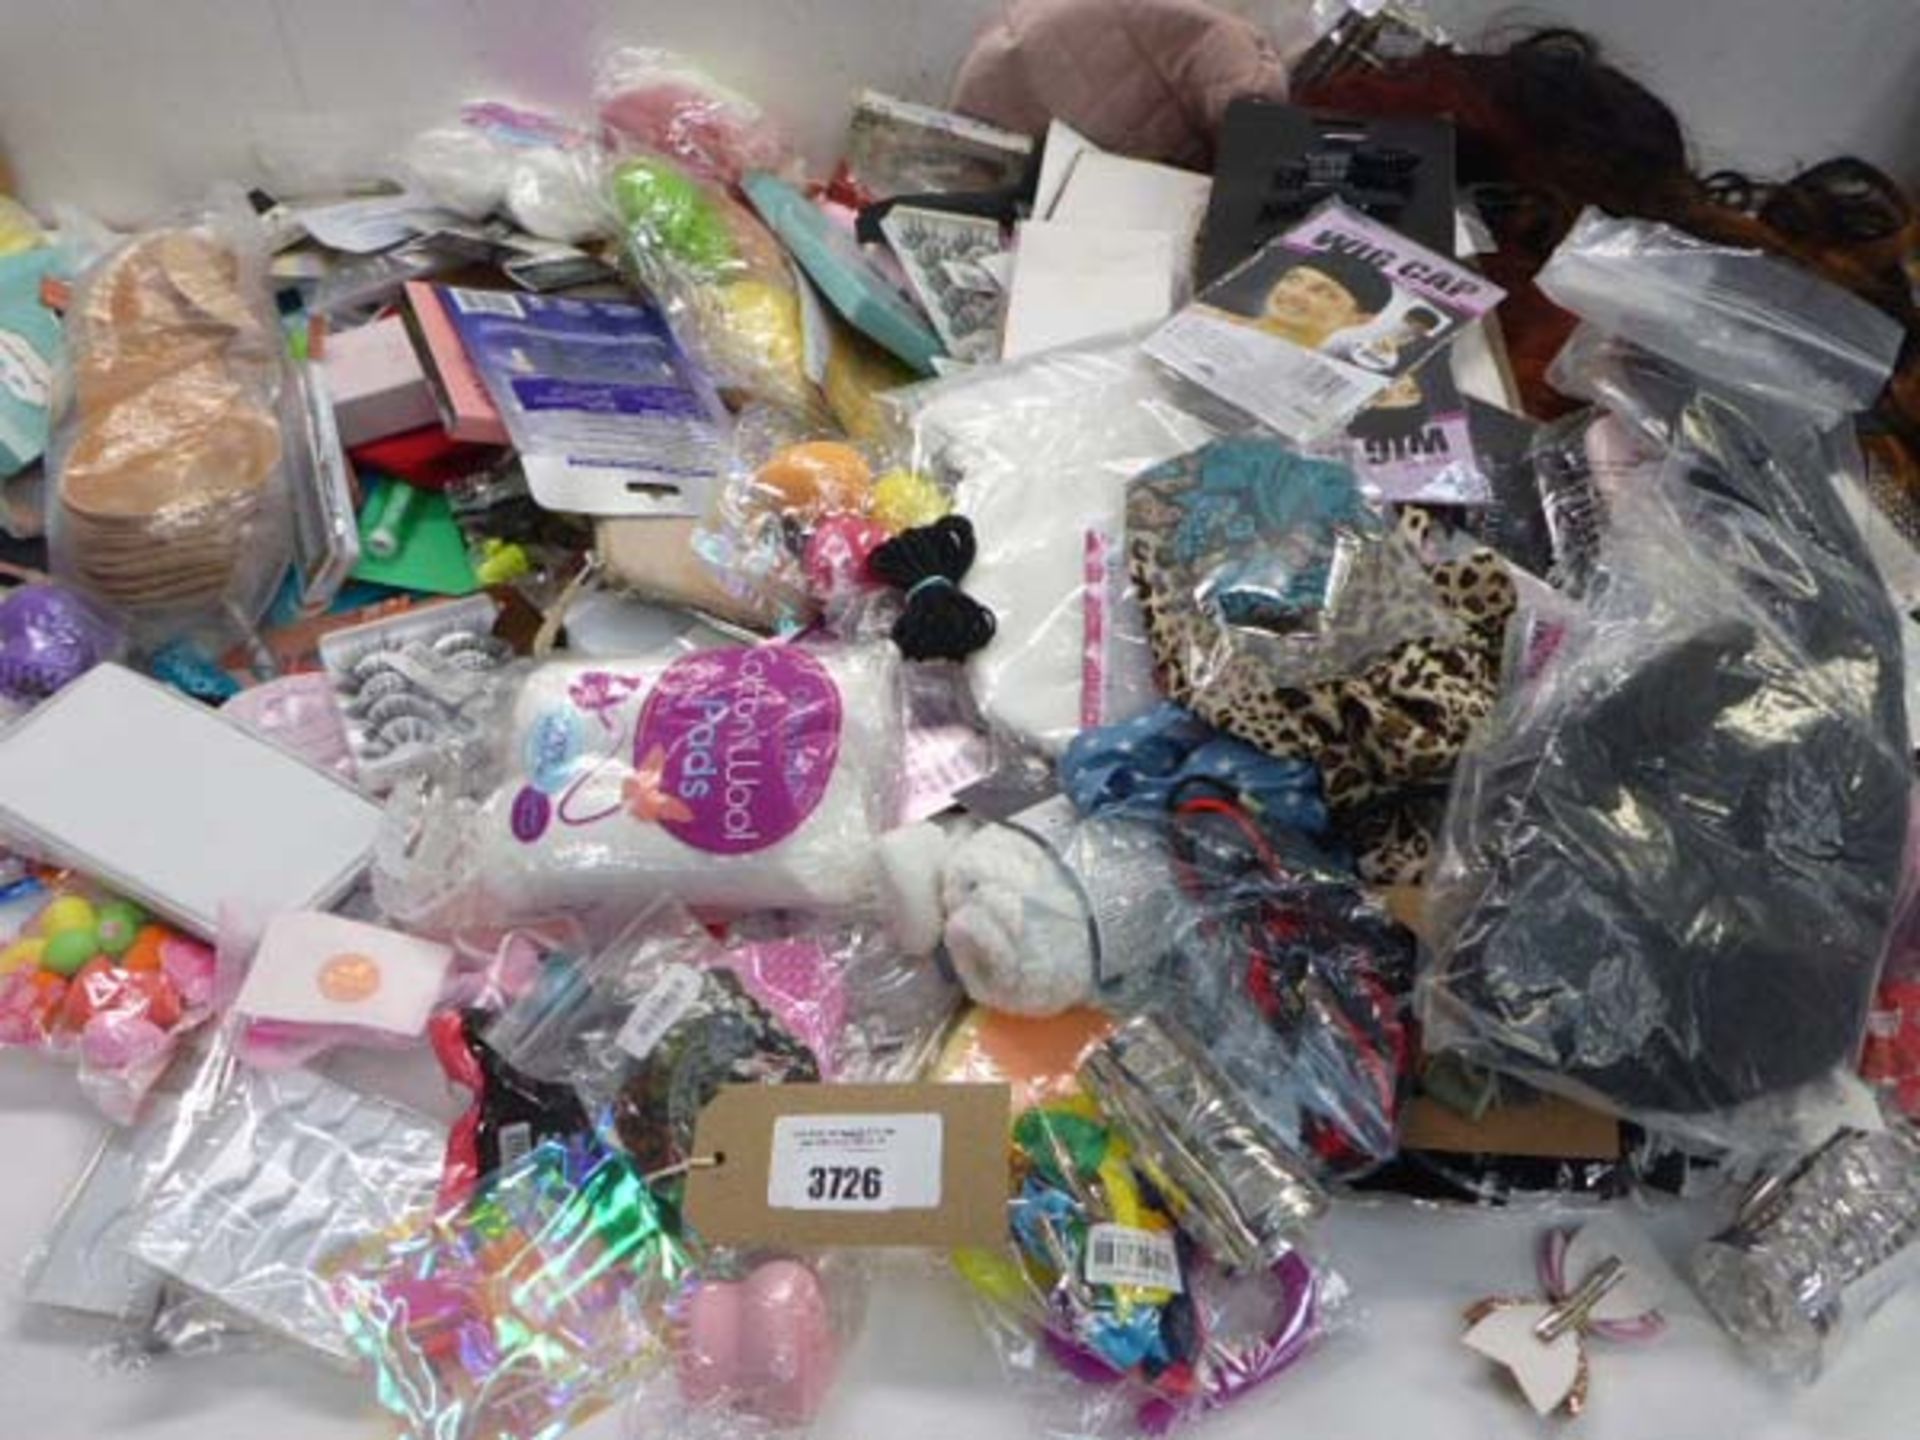 Large bag of beauty products including wigs, hair accessories, false nails & accessories, false